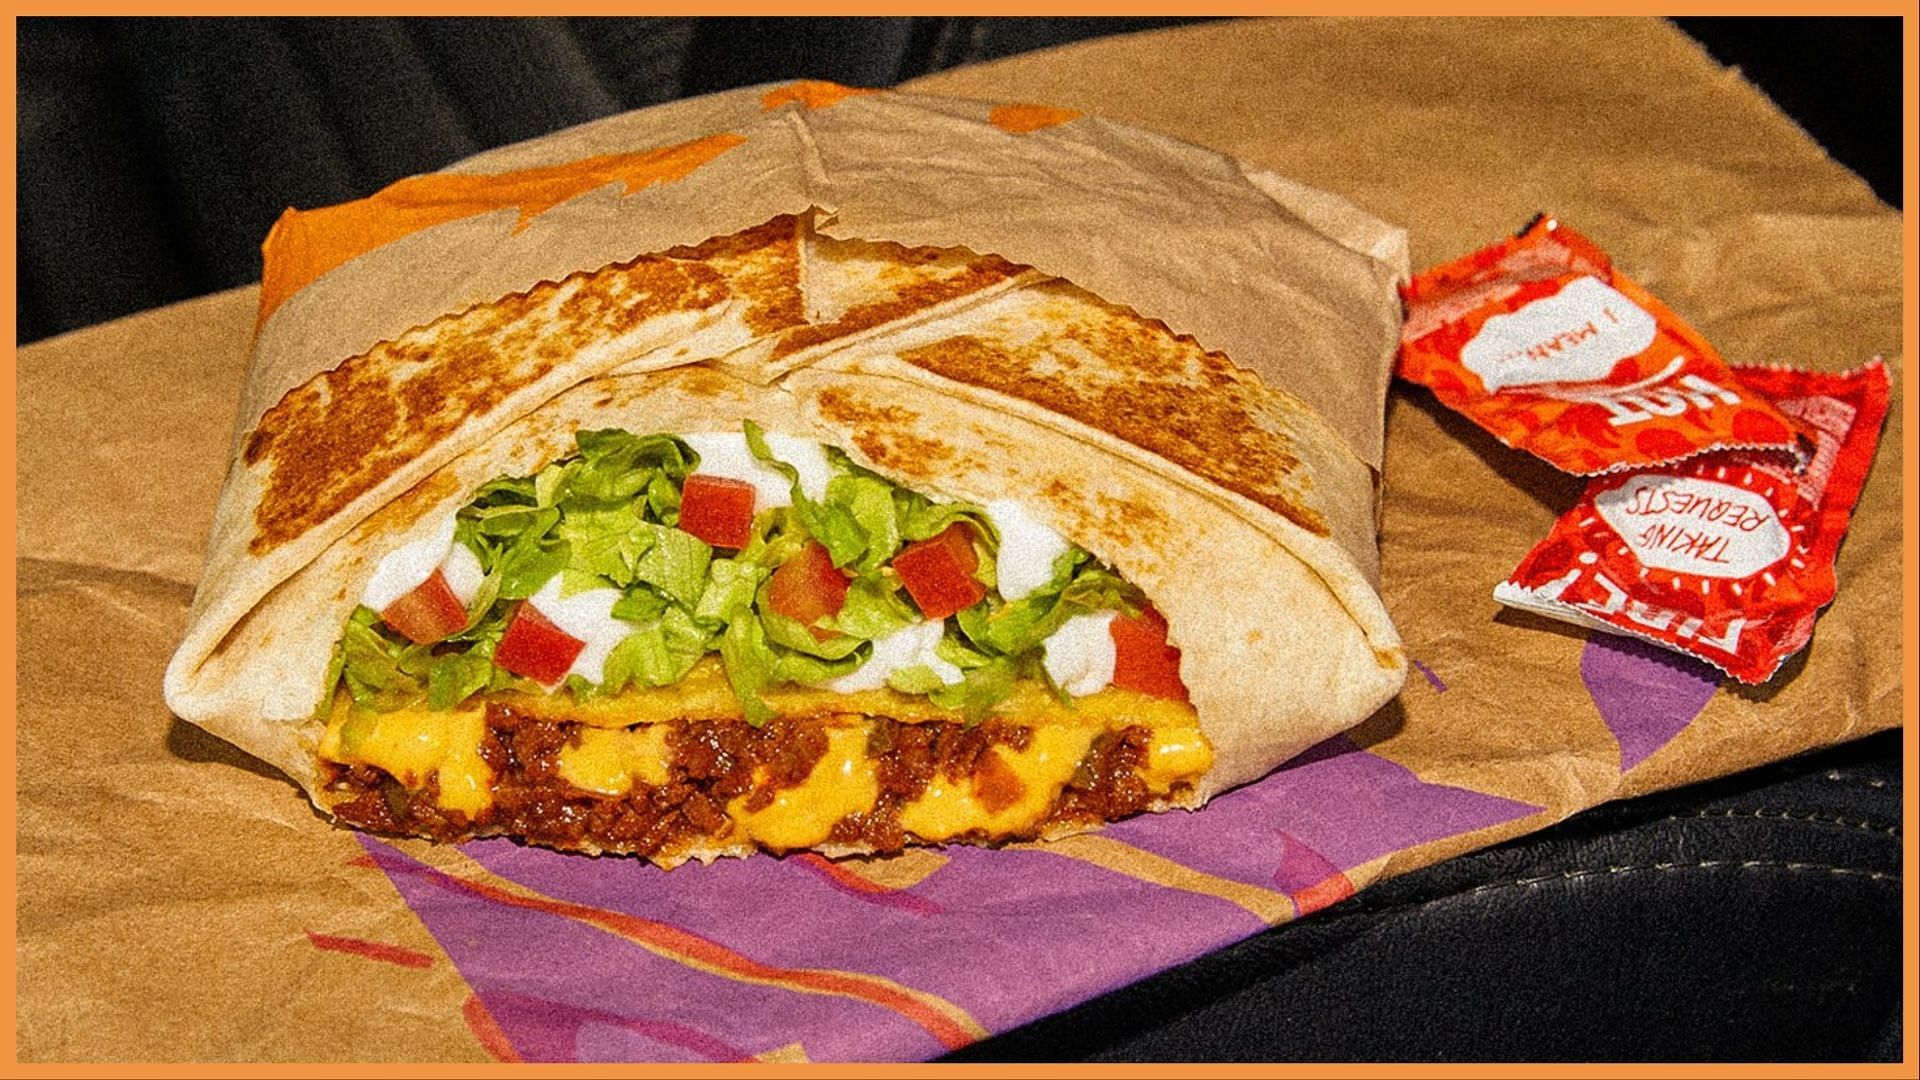 Taco Bell is here with a new Vegan delicacy, the Vegan Crunchwrap (Image via Twitter/@jonathanmaze)